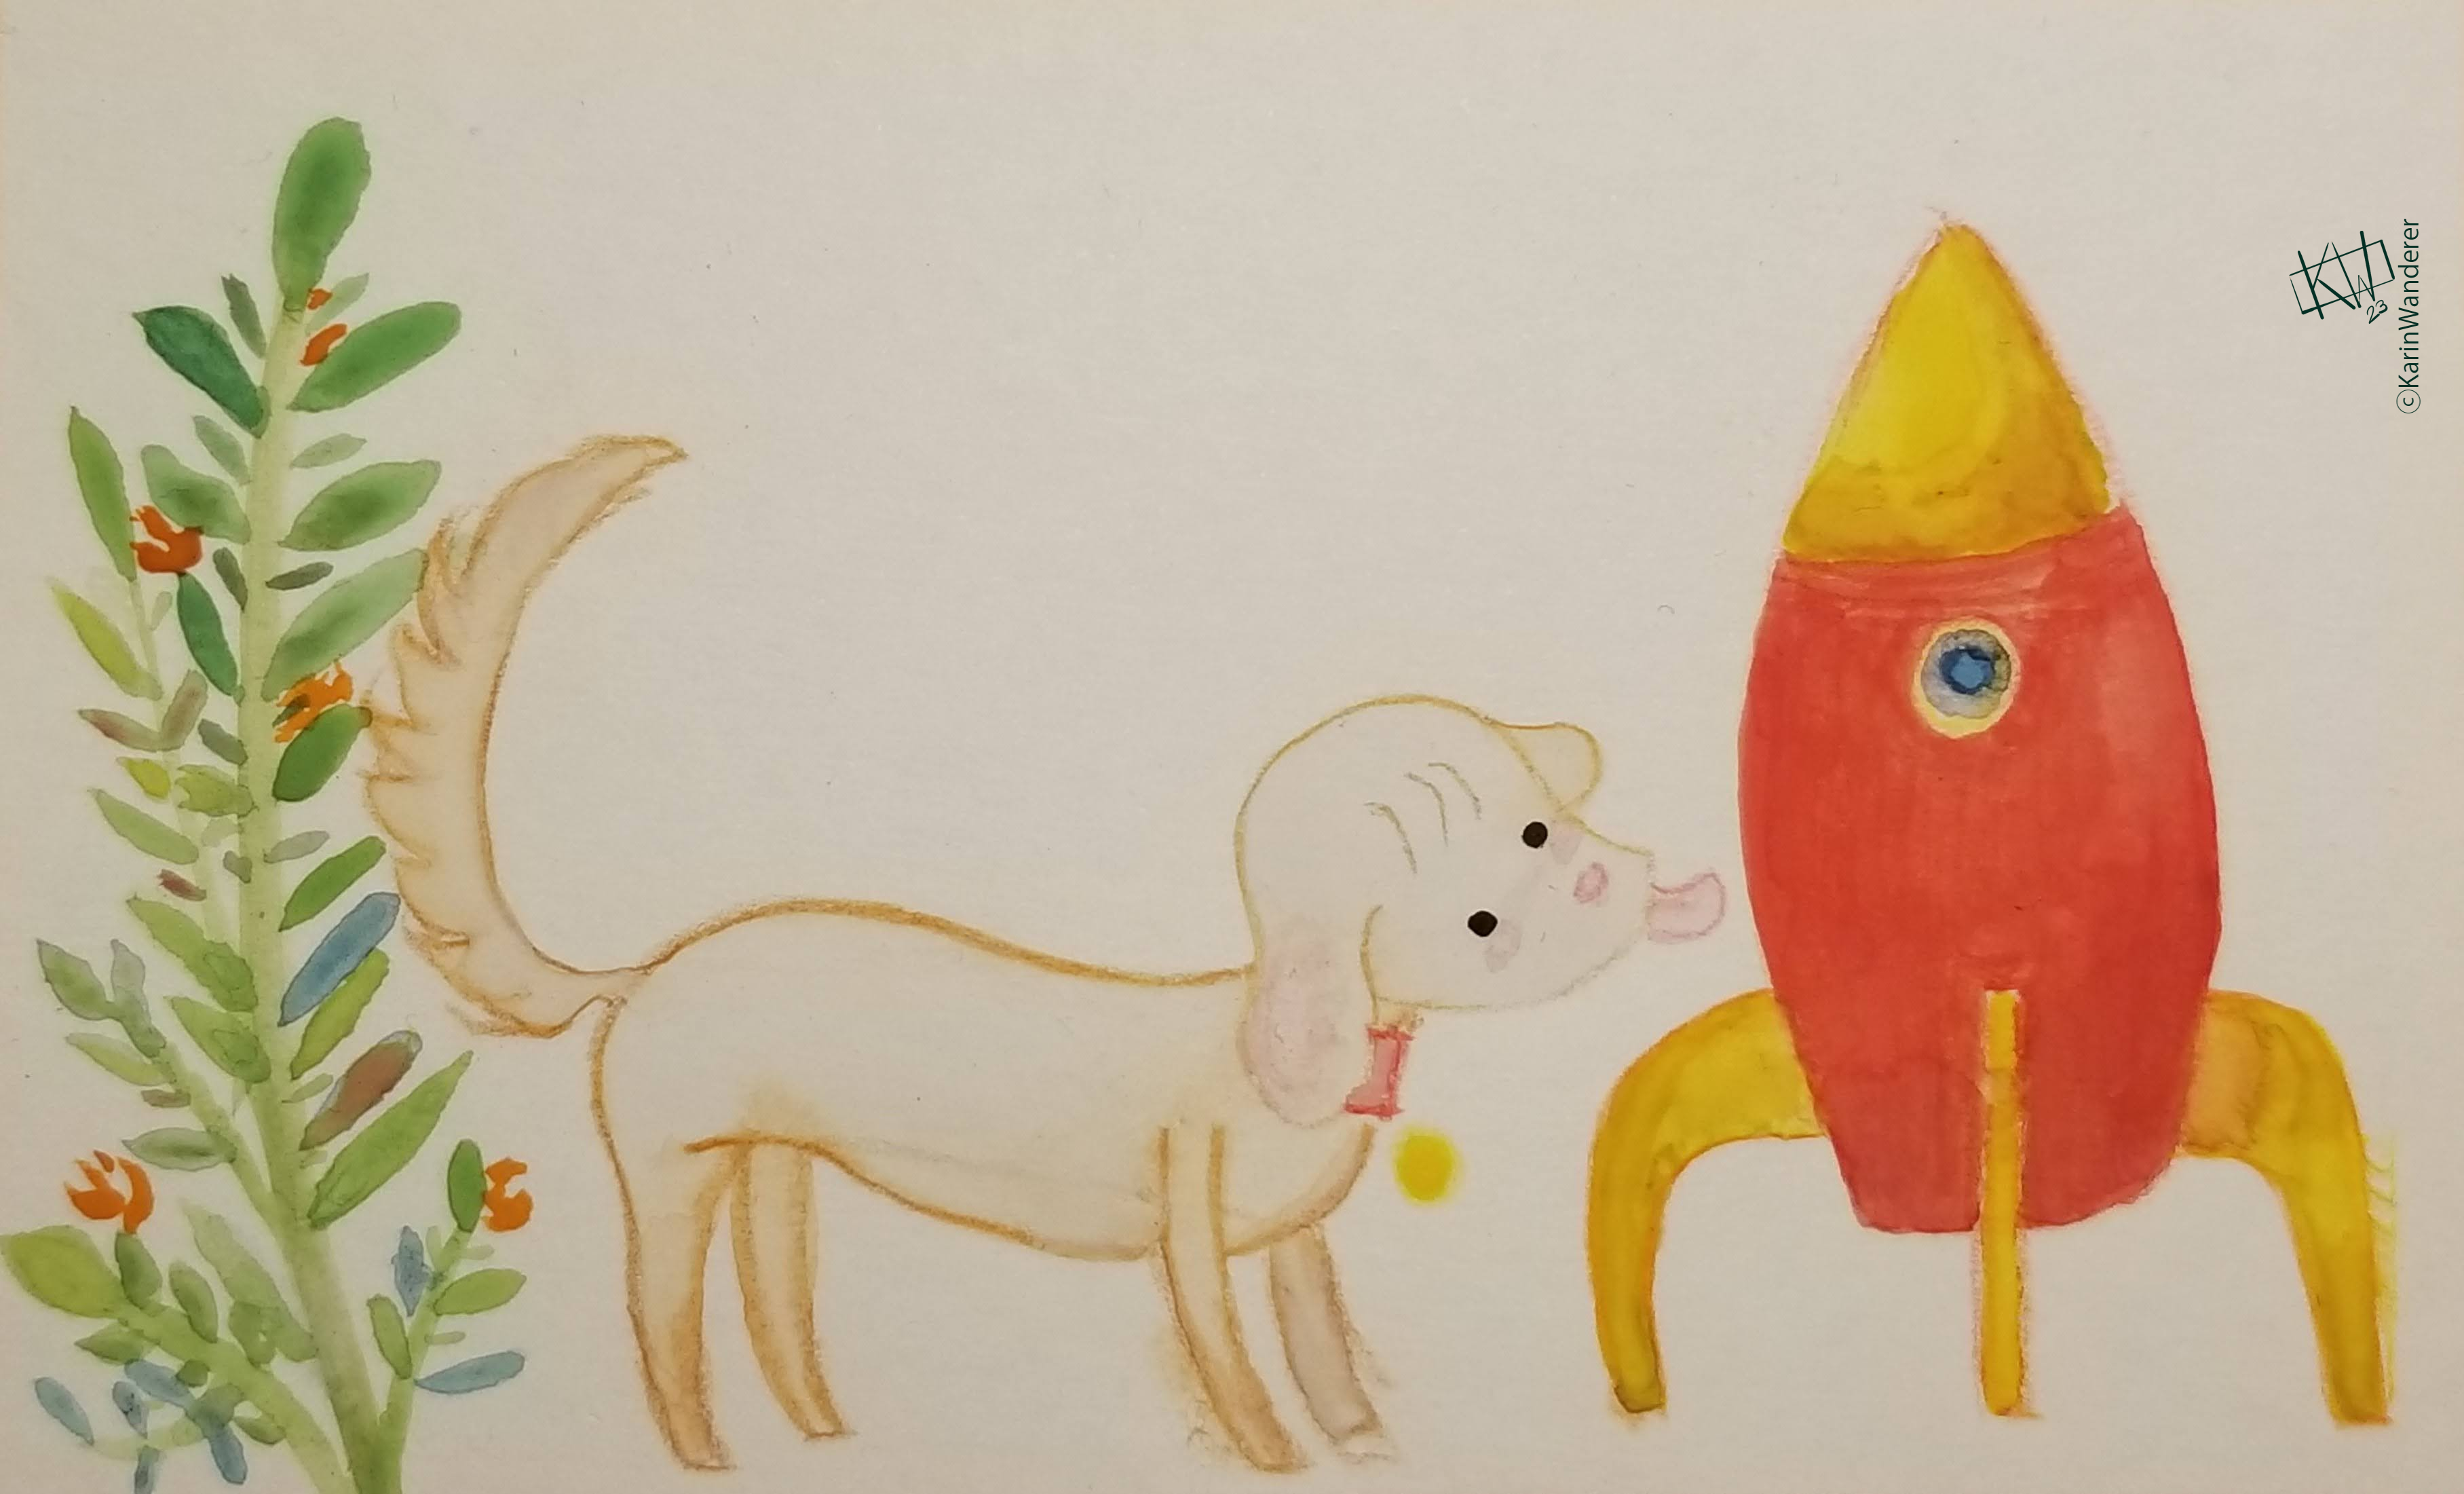 Watercolor of a cute white puppy about to lick a red & yellow rocket ship. A large plant is growing nearby with lots of foliage & orange flowers.